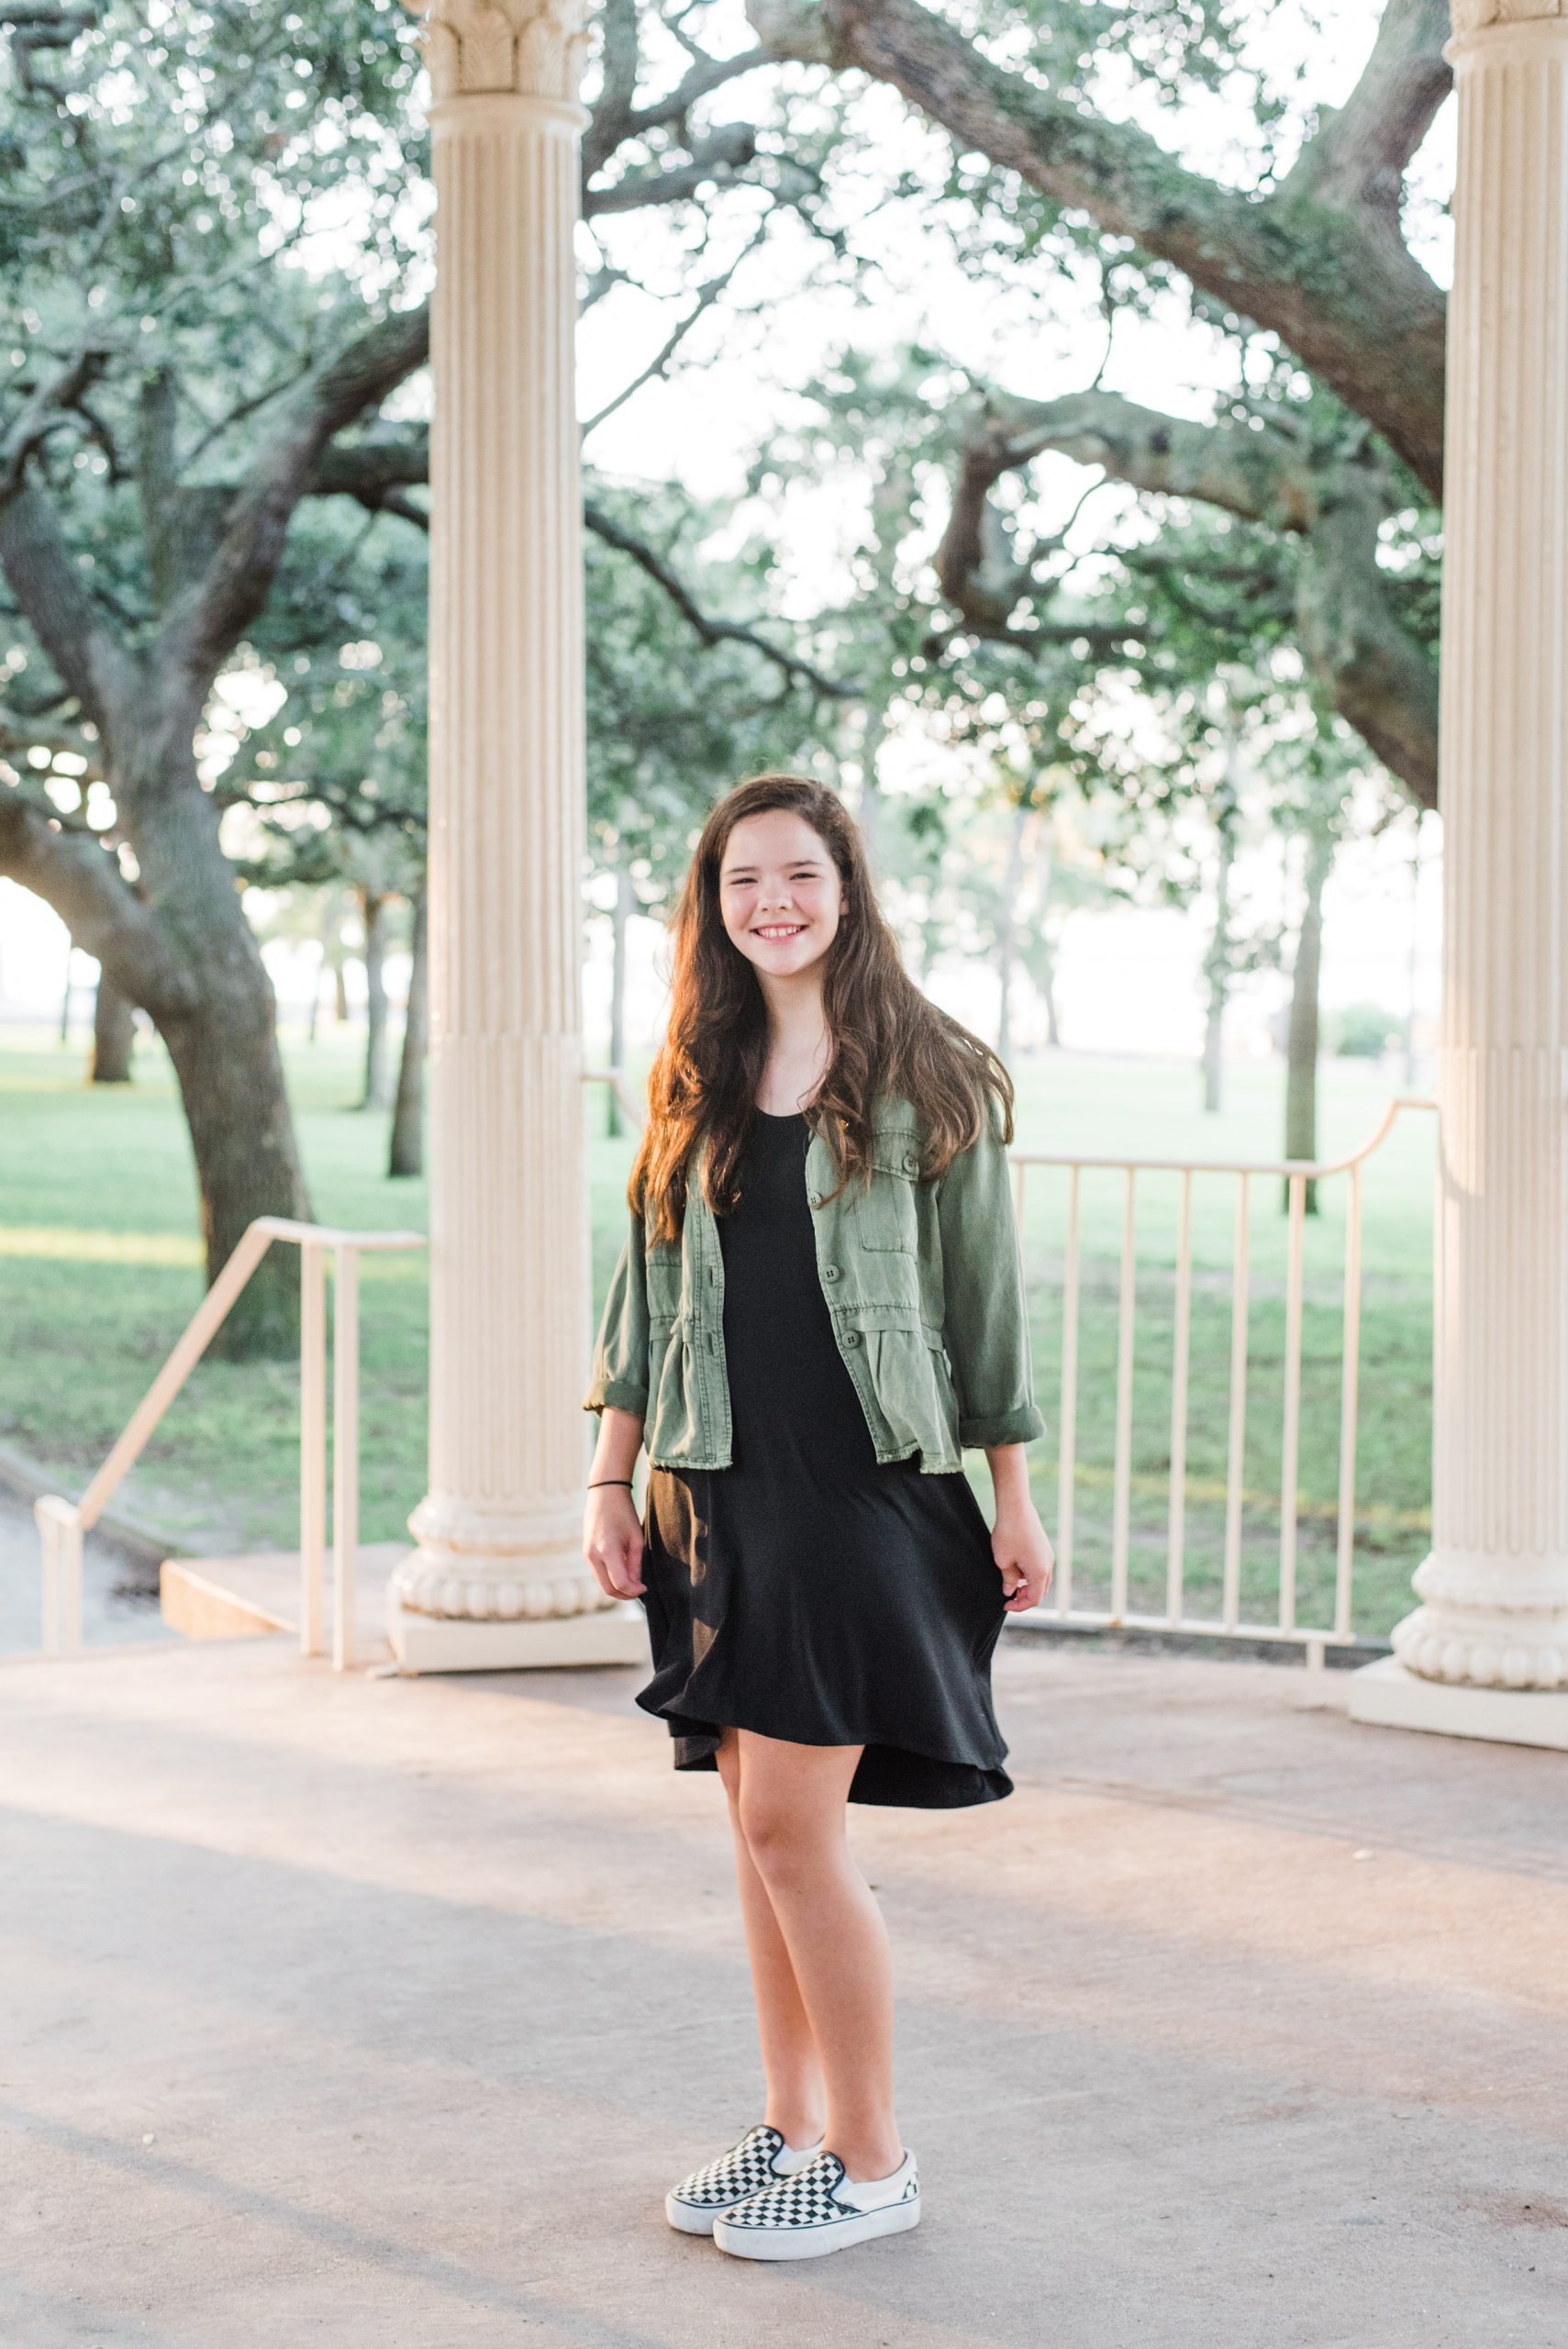 young girl in black dress with green jacket poses in Charleston gazebo